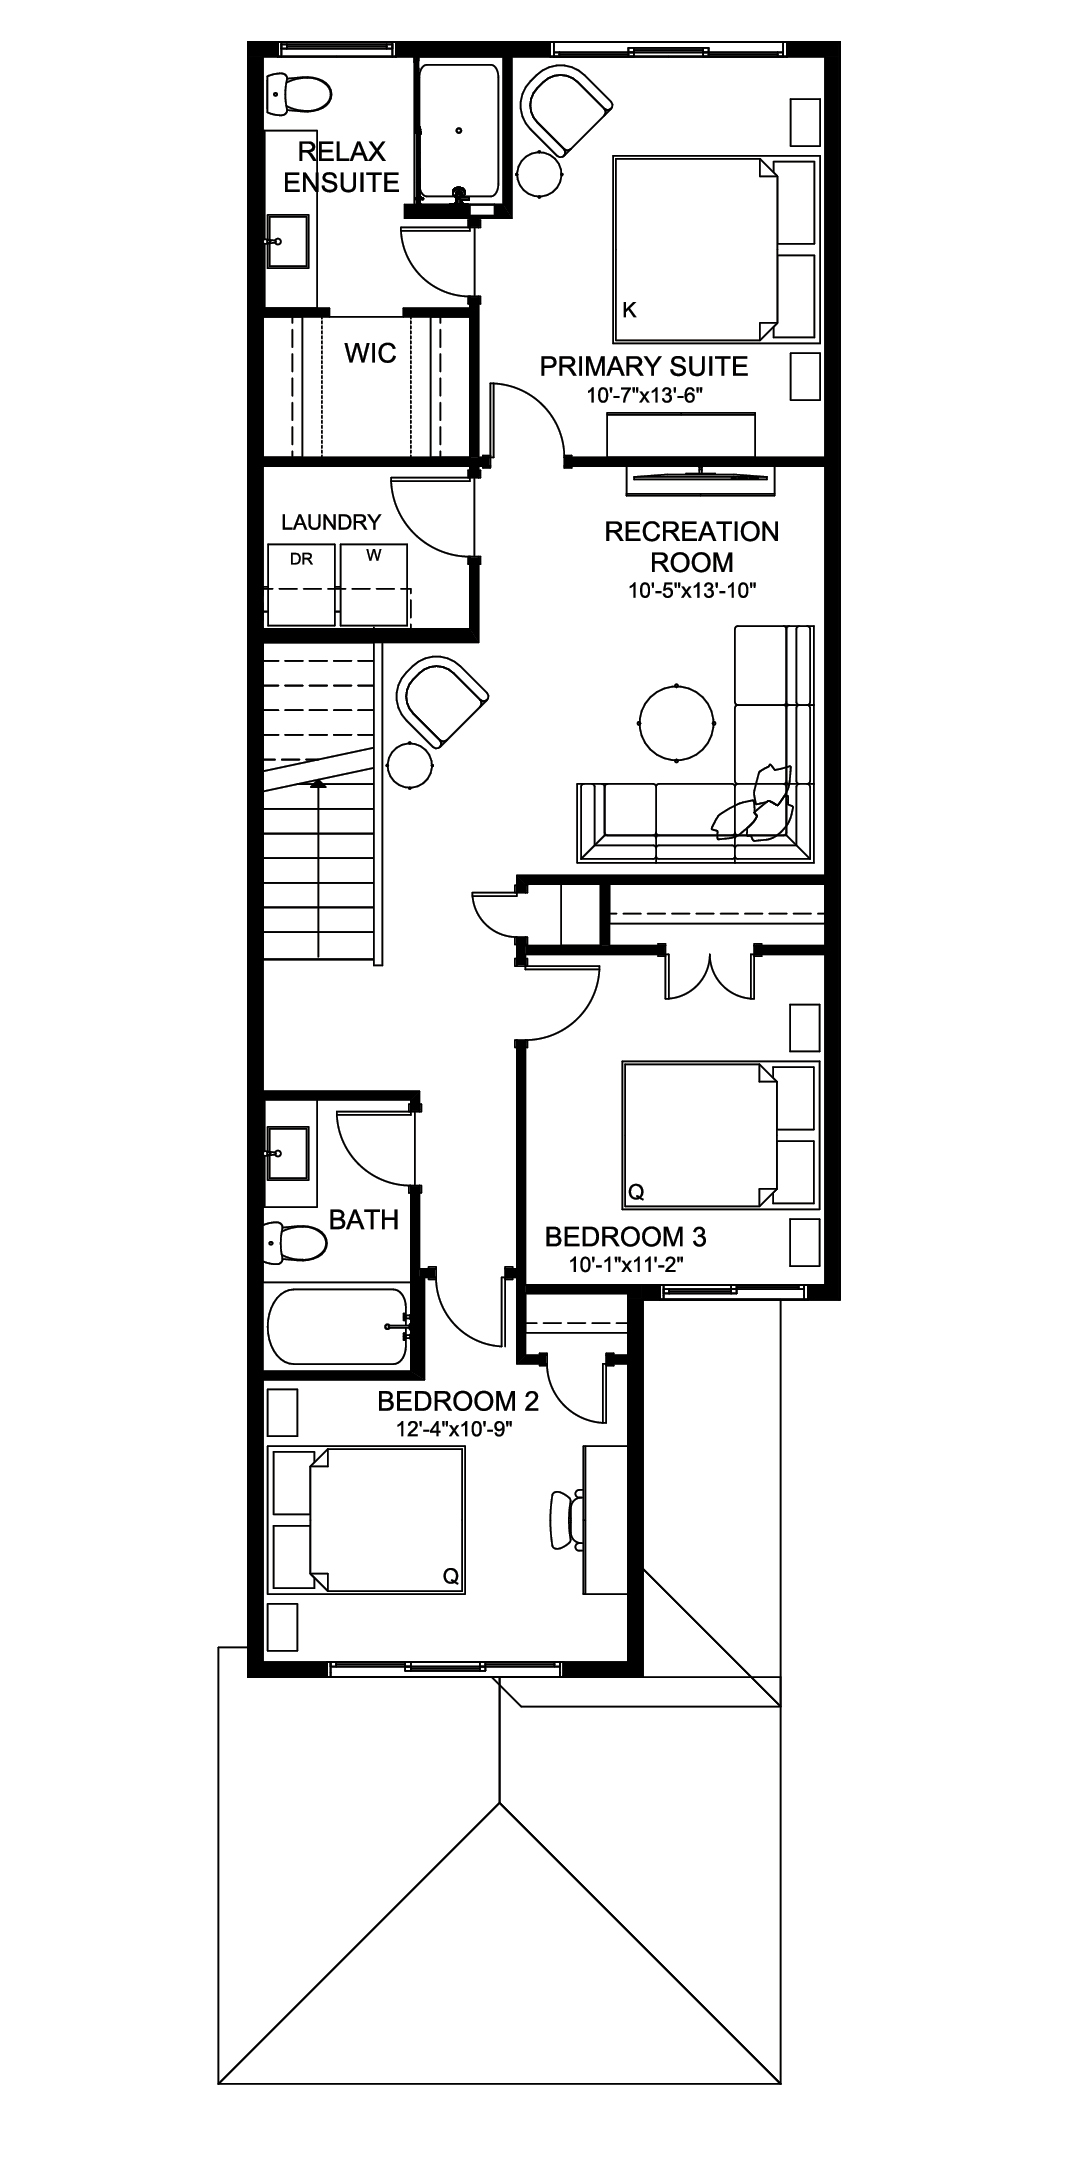 Entertain Elevate 20 Floor Plan of The Hills at Charlesworth Cantiro Homes with undefined beds